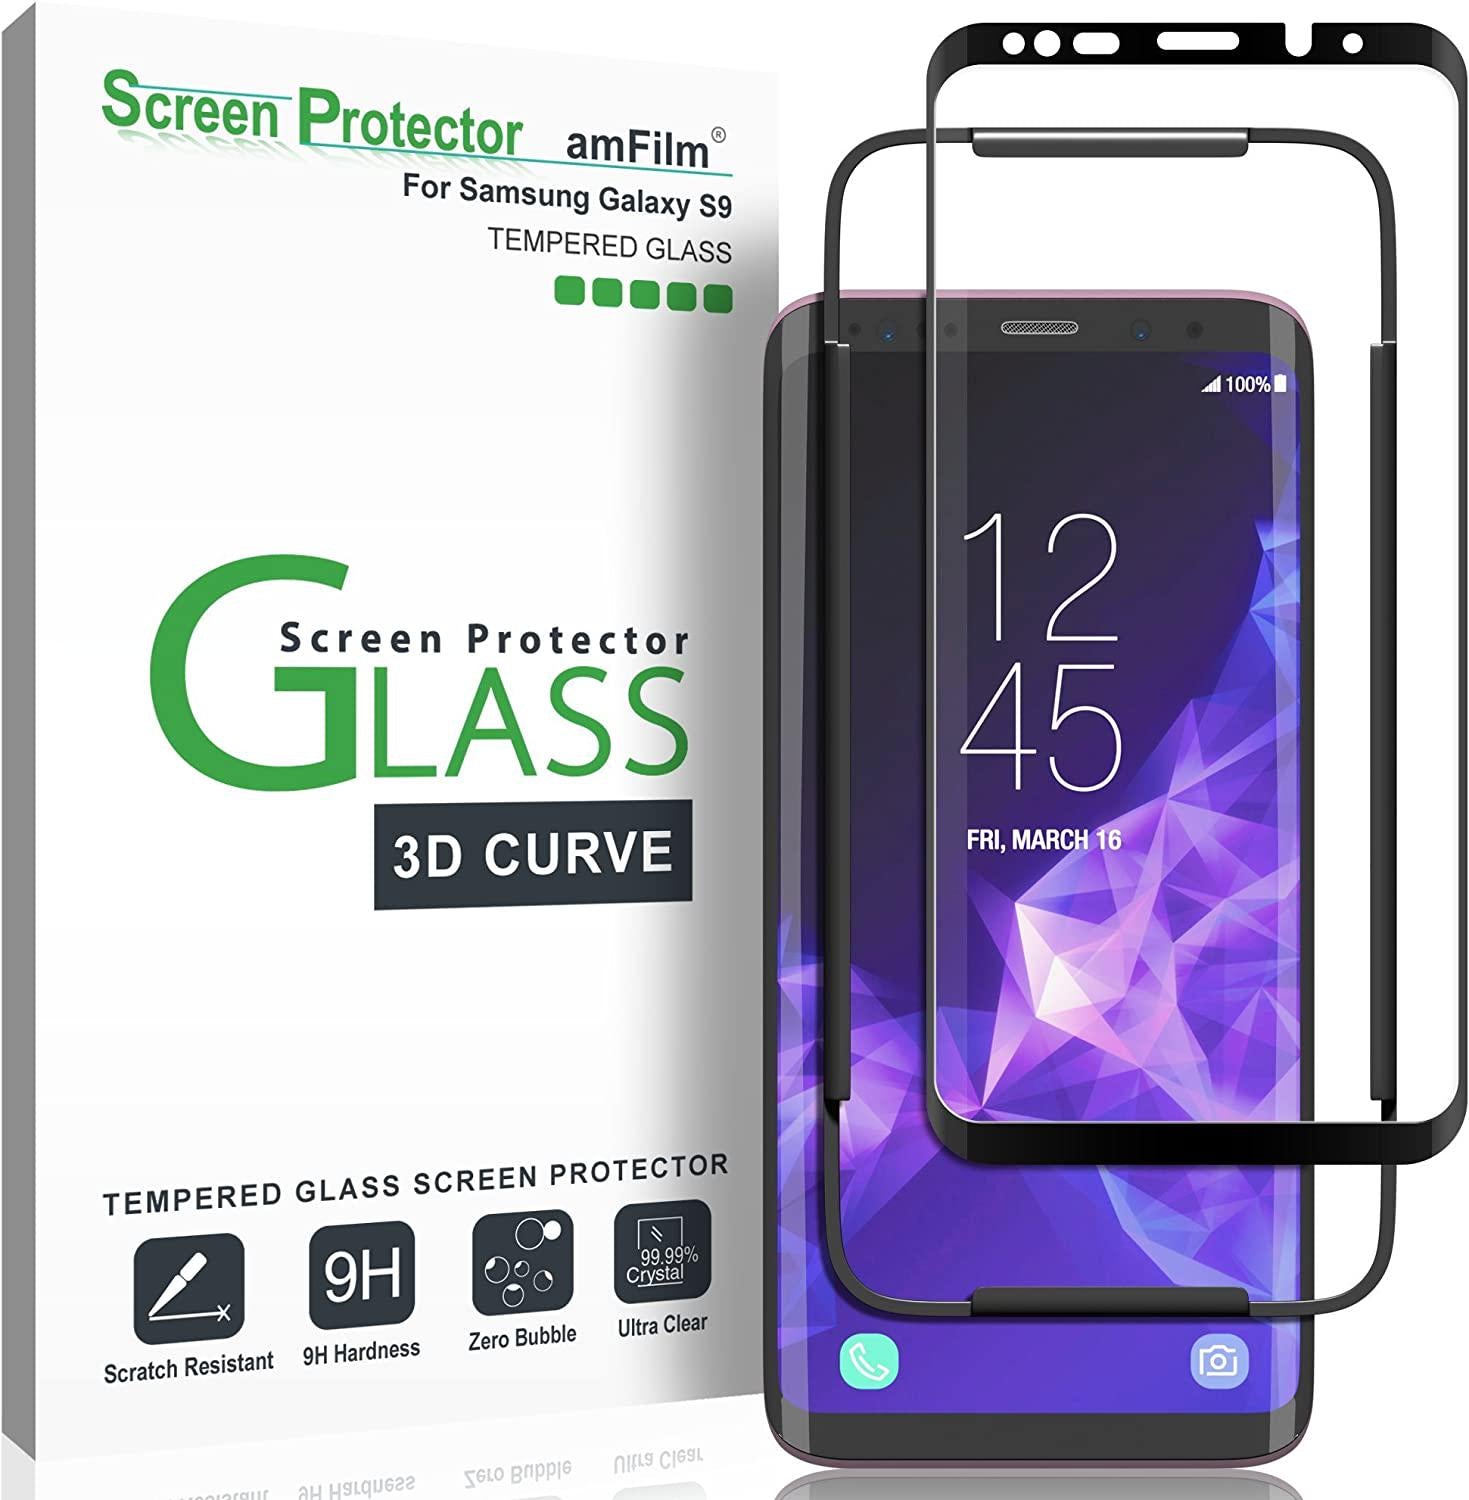 amFilm, Galaxy S9 Screen Protector Glass, amFilm Full Cover (3D Curved) Tempered Glass Screen Protector with Dot Matrix for Samsung Galaxy S9 (Black)